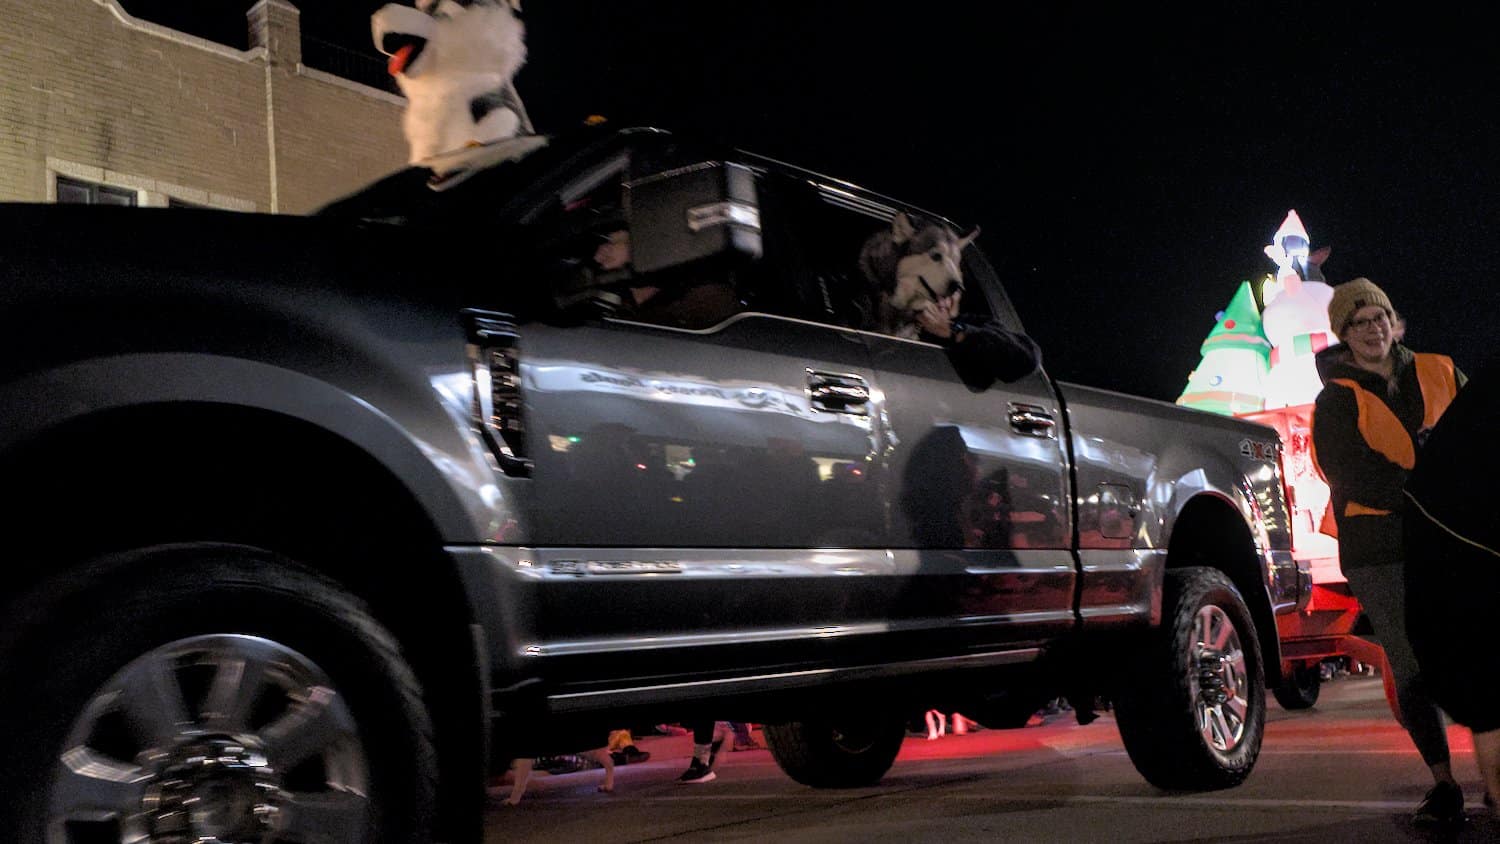 Huskies riding in the truck.